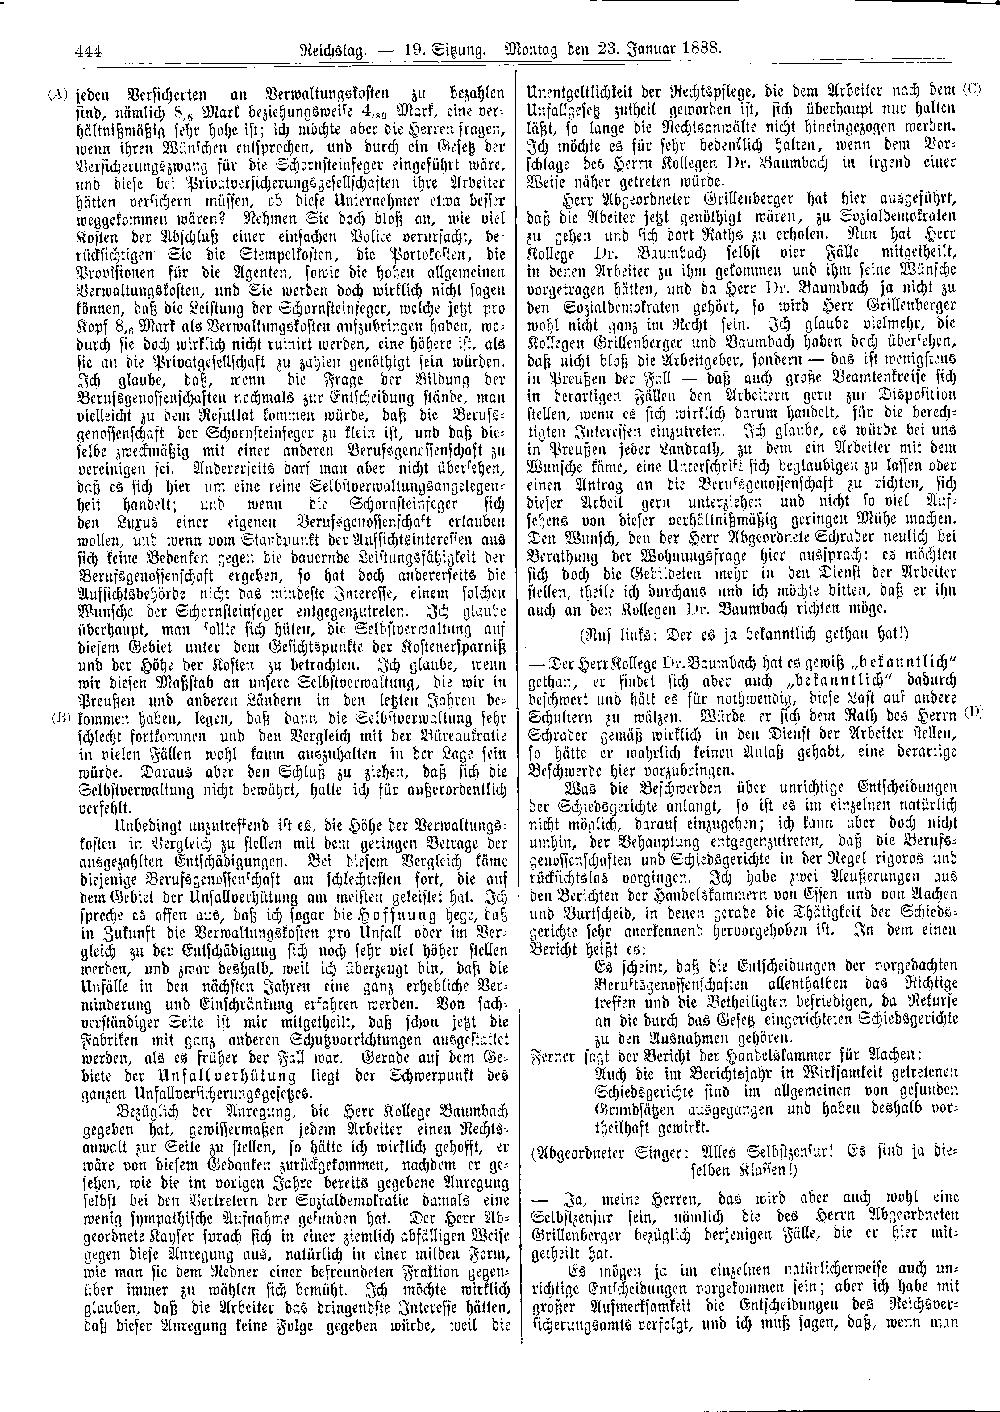 Scan of page 444